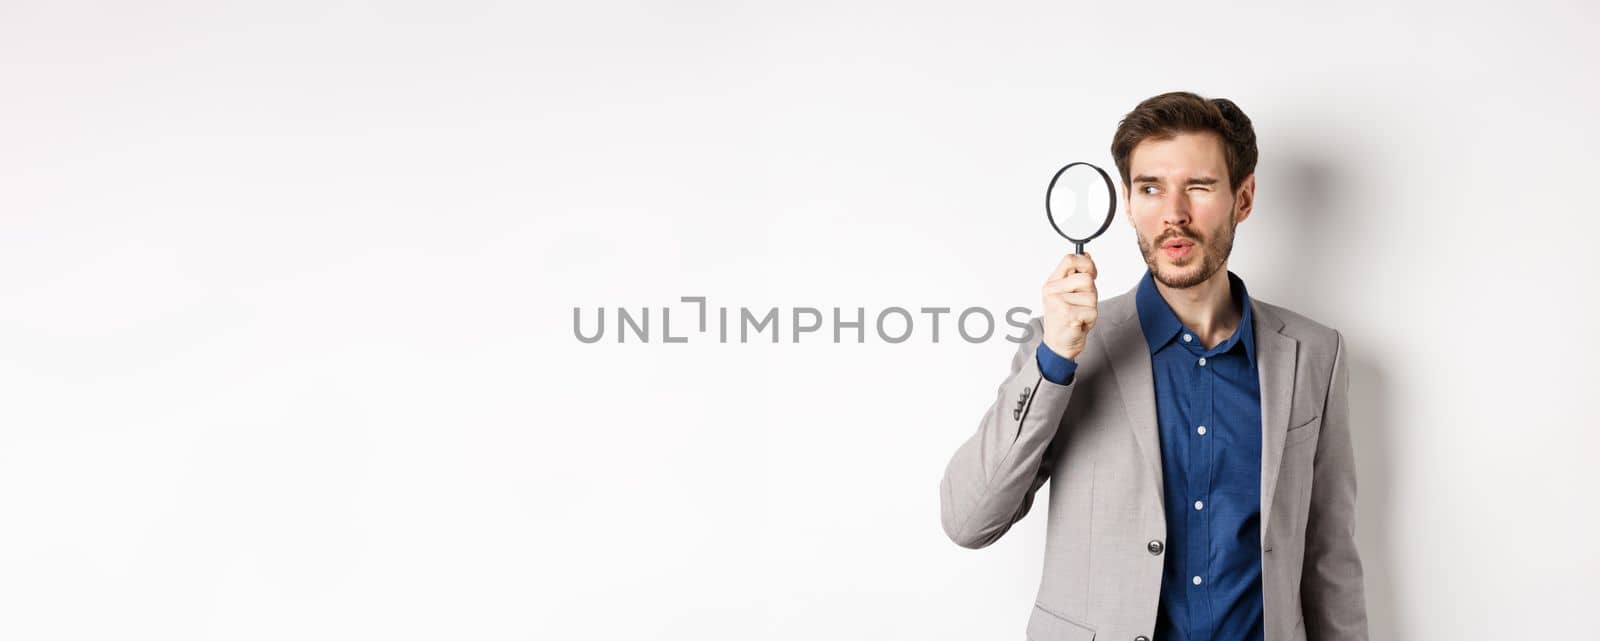 Handsome male model in suit looking through magnifying glass with interest, seeing something aside, white background.